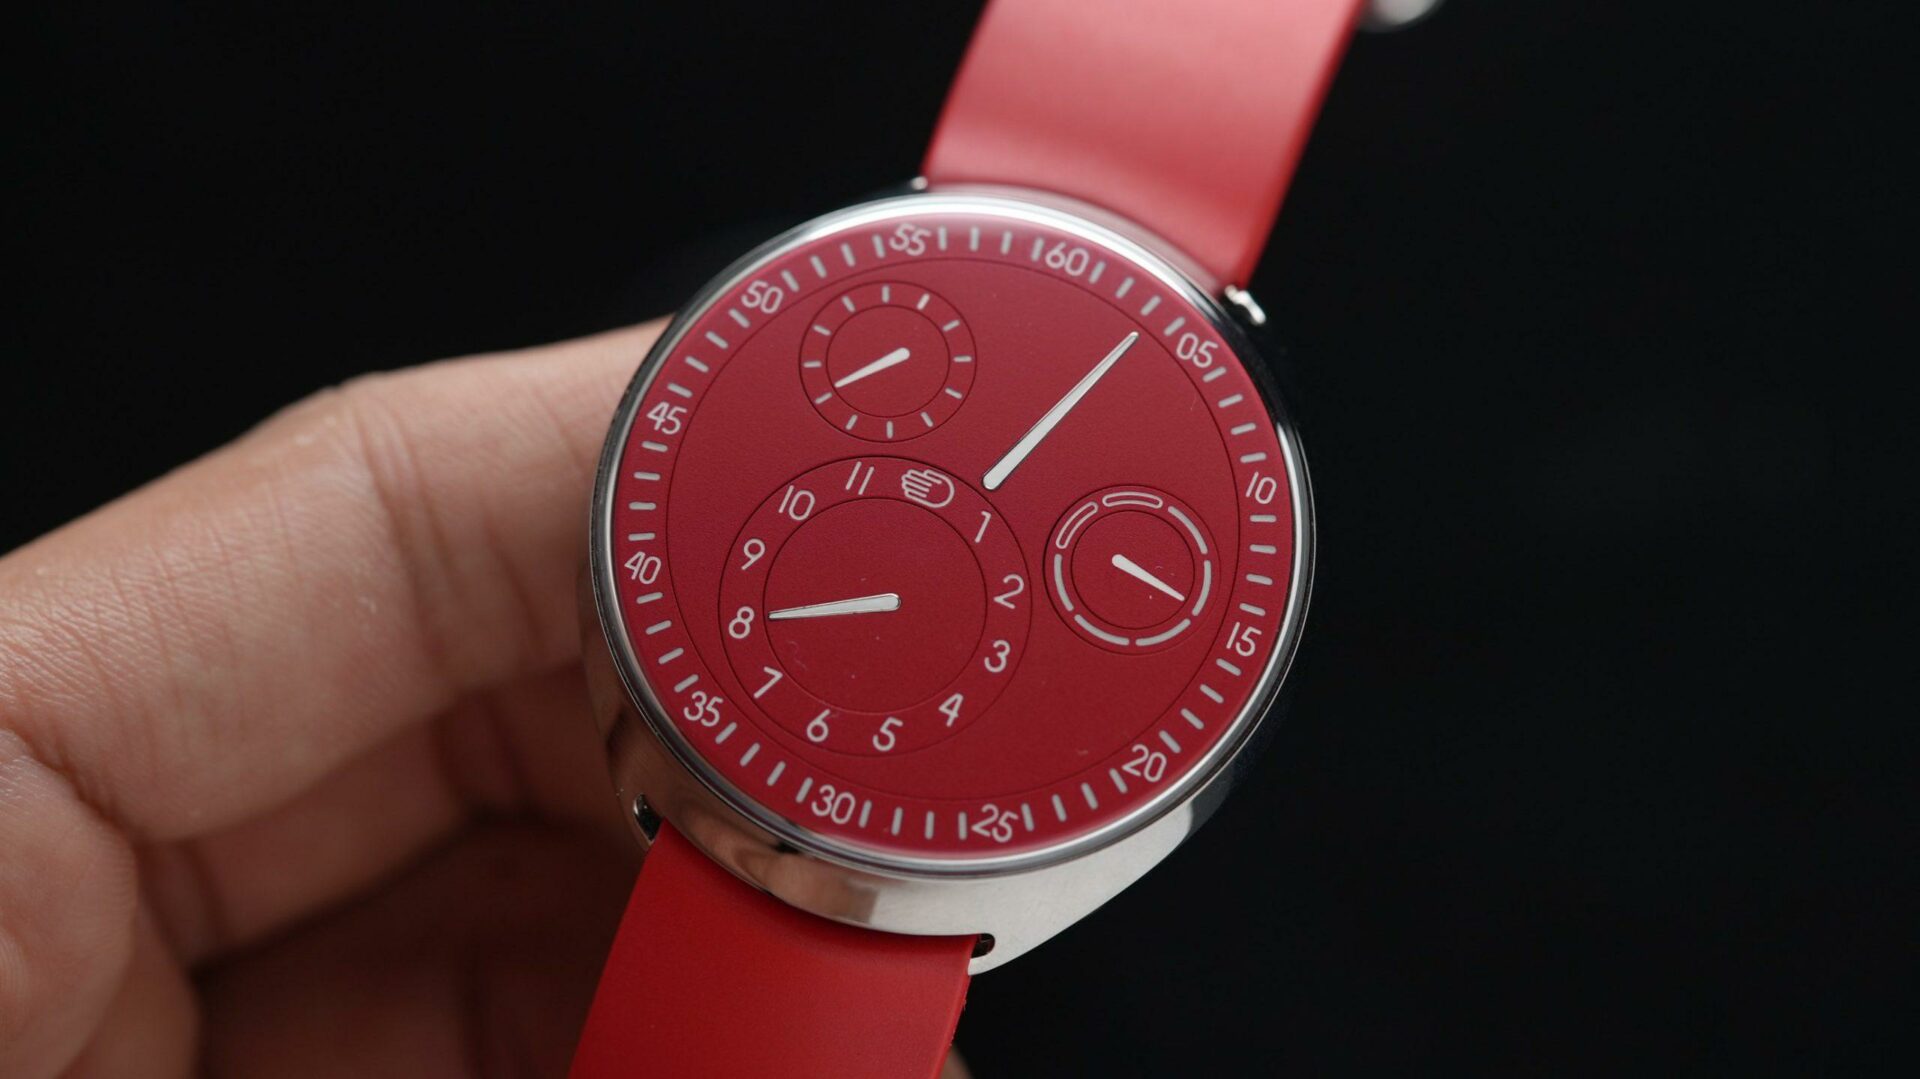 Ressence Type 1 Slim Red being held and displayed in hand.